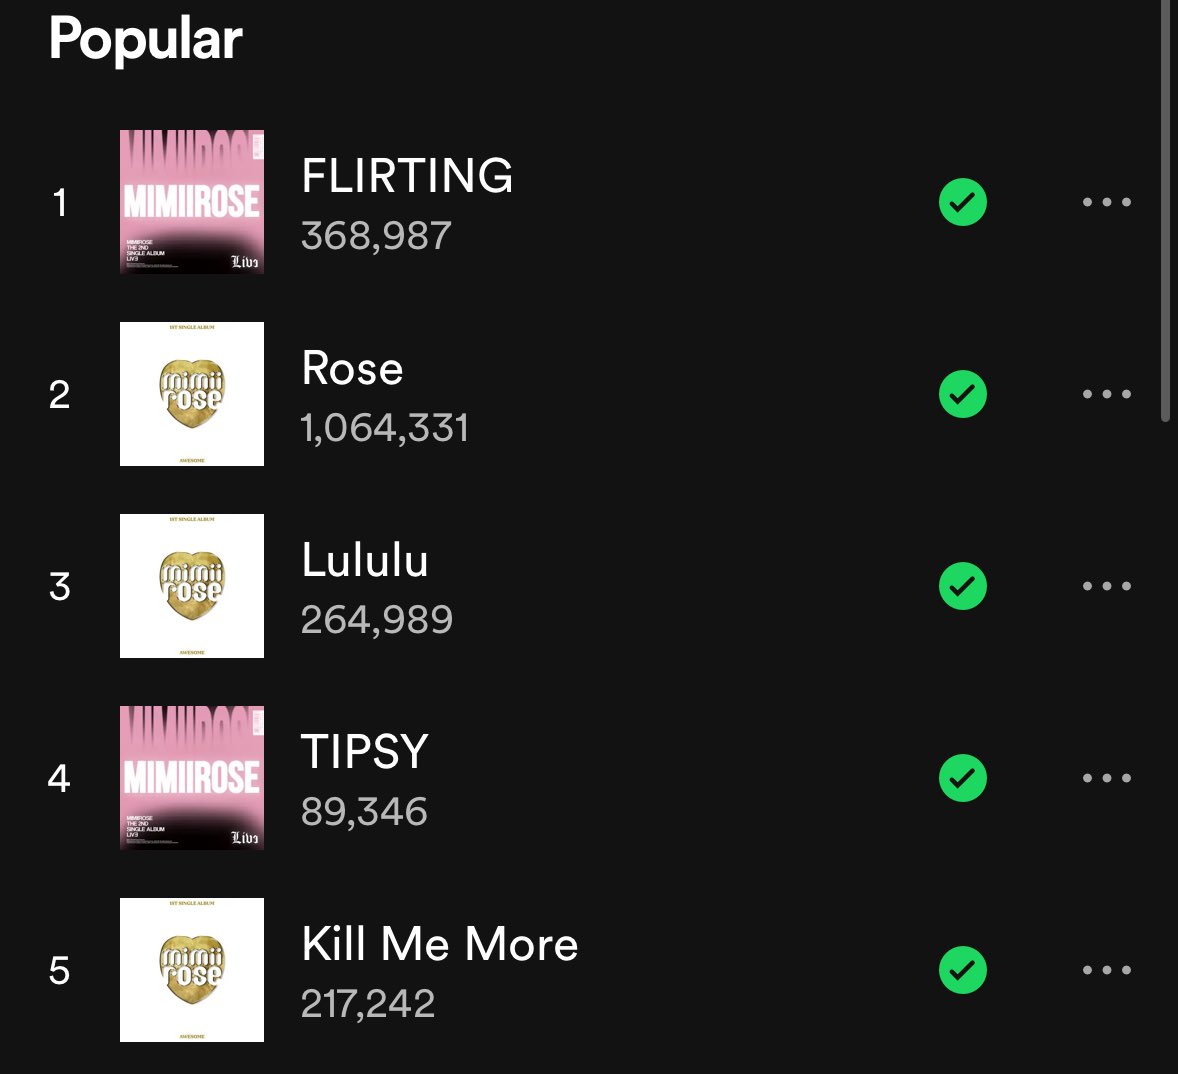 ranking mimiirose top 5 on spotify, except this is their entire discography apart from 1 song 😭